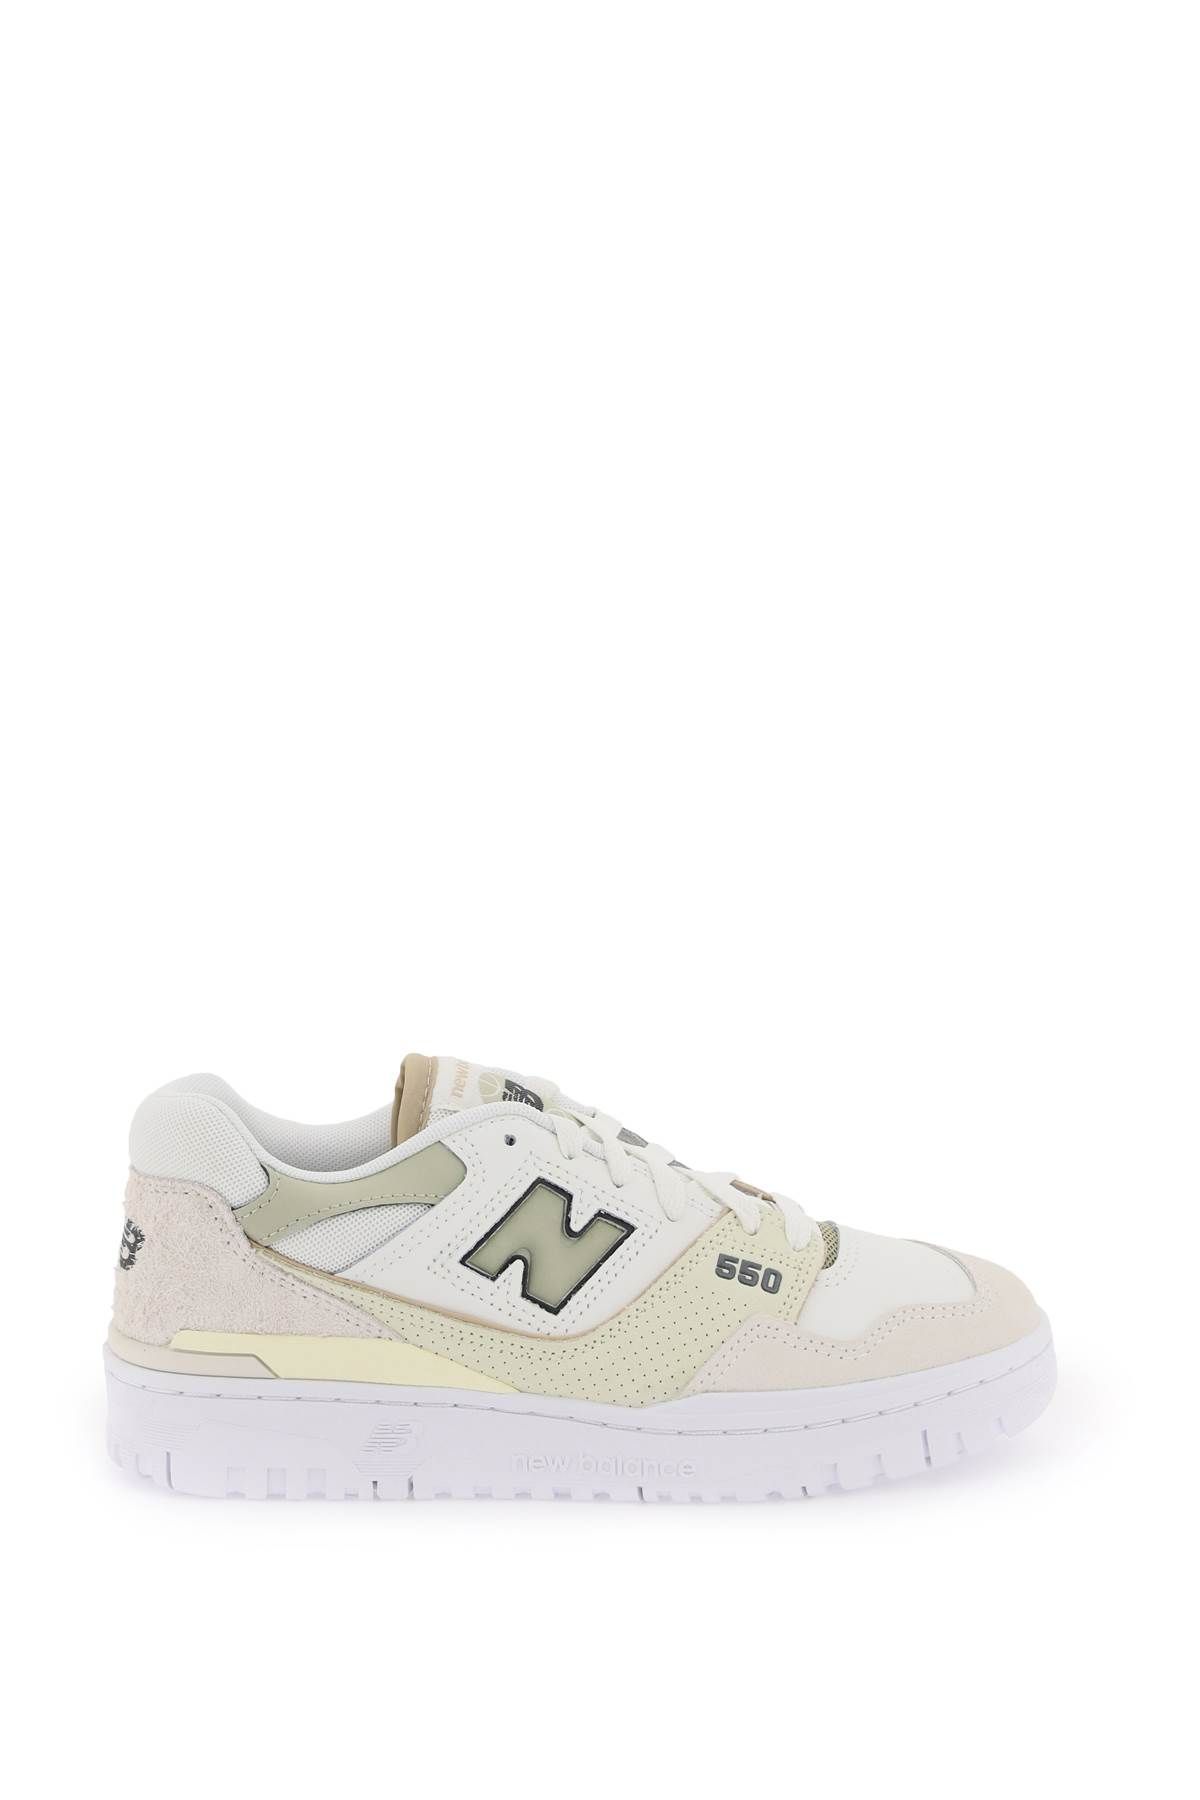 New Balance 550 Sneakers In White,green,yellow